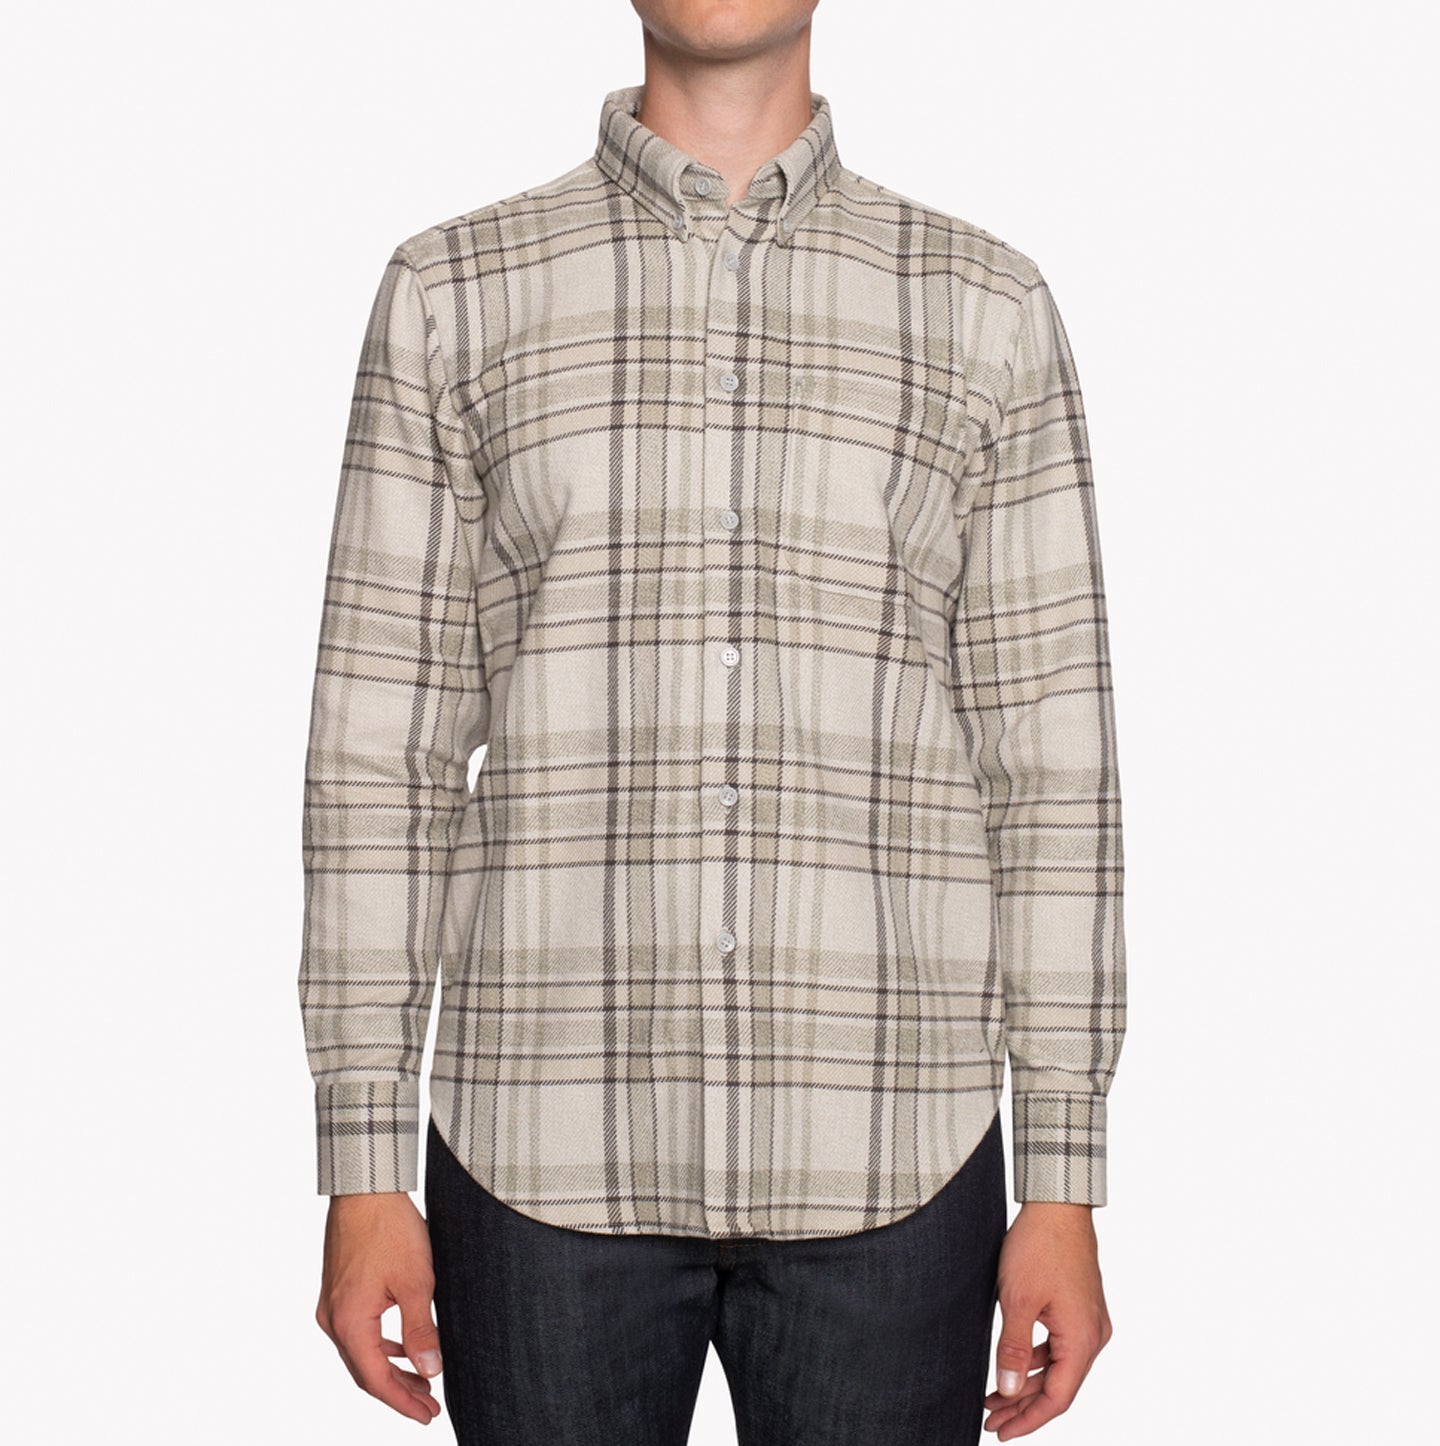 Easy Shirt - Heavy Vintage Flannel - Pale Grey